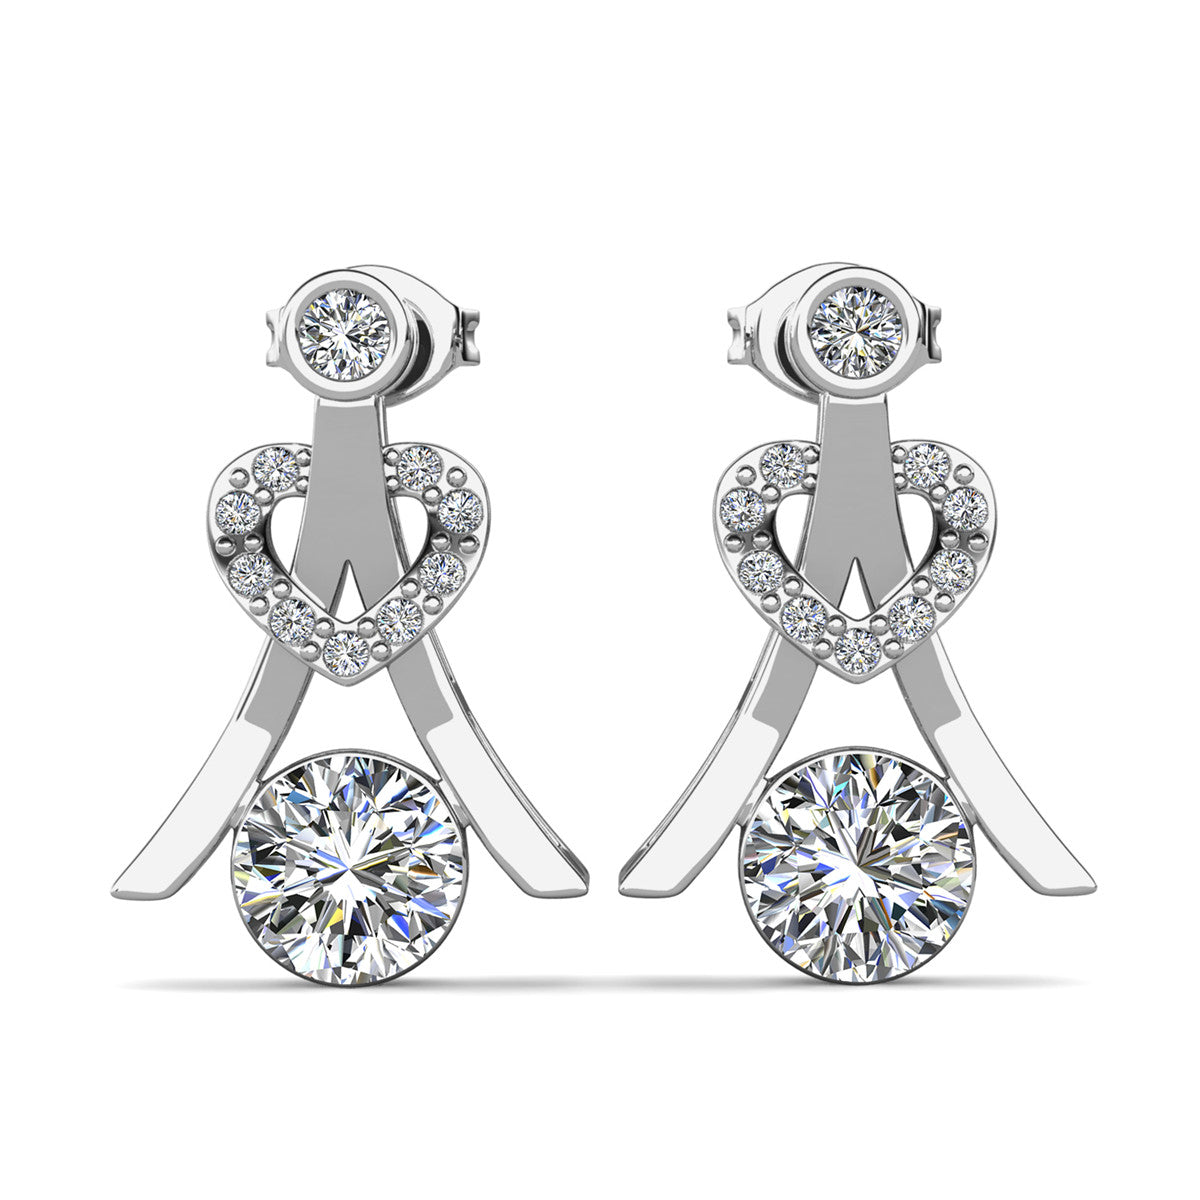 Serenity April Birthstone Diamond Earrings,  18k White Gold Plated Silver Earrings with Round Cut Crystals